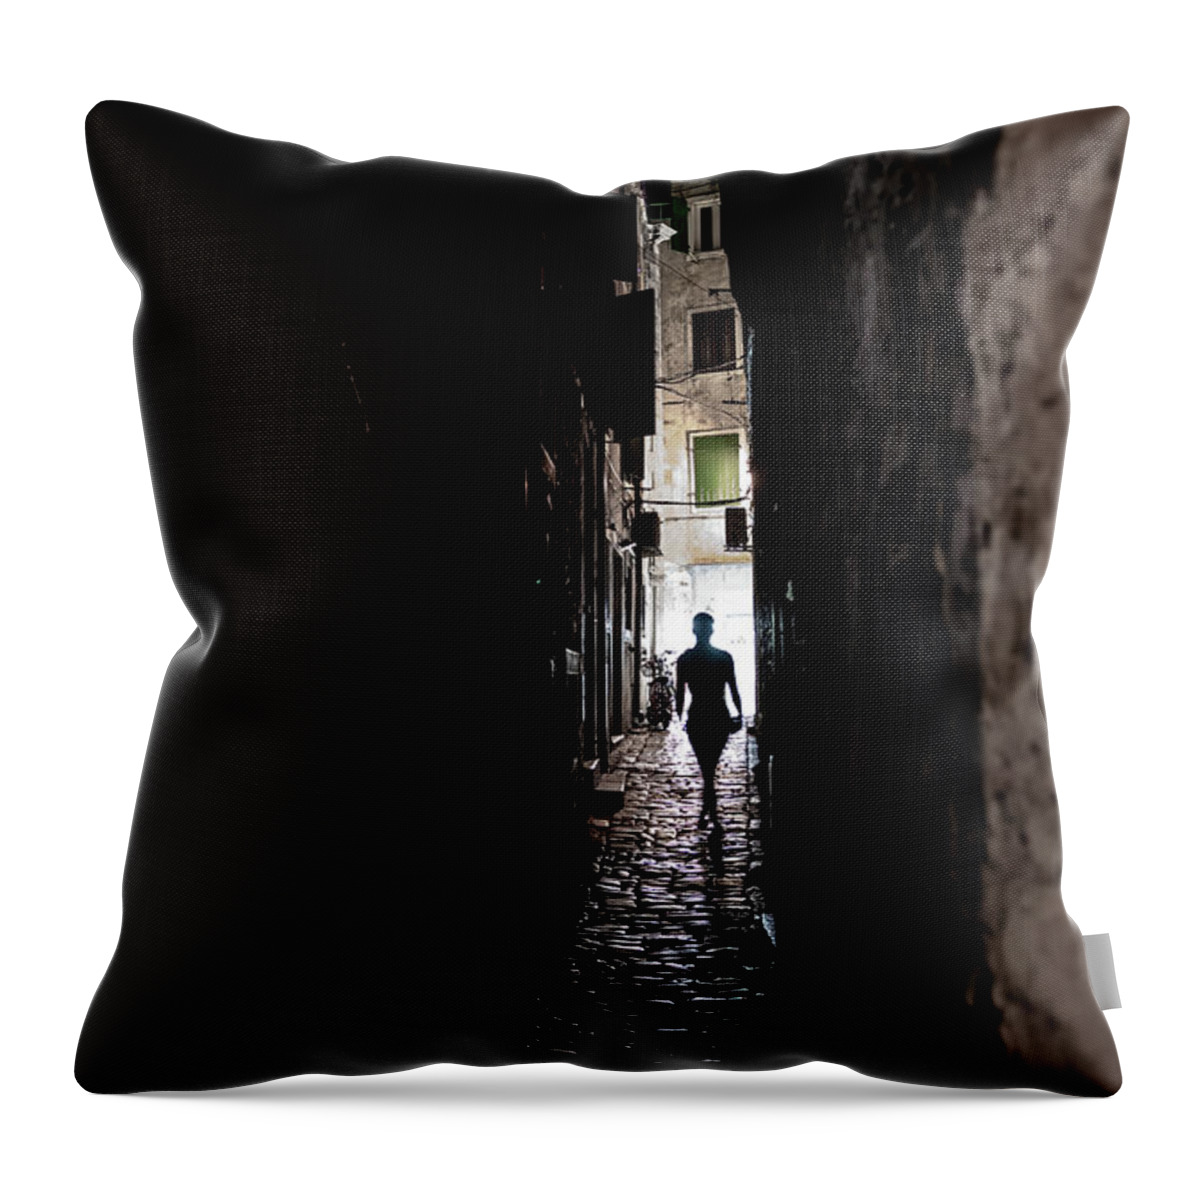  Throw Pillow featuring the photograph Young Woman Walks Alone Through Spooky Narrow Abandoned Alley In The Night by Andreas Berthold